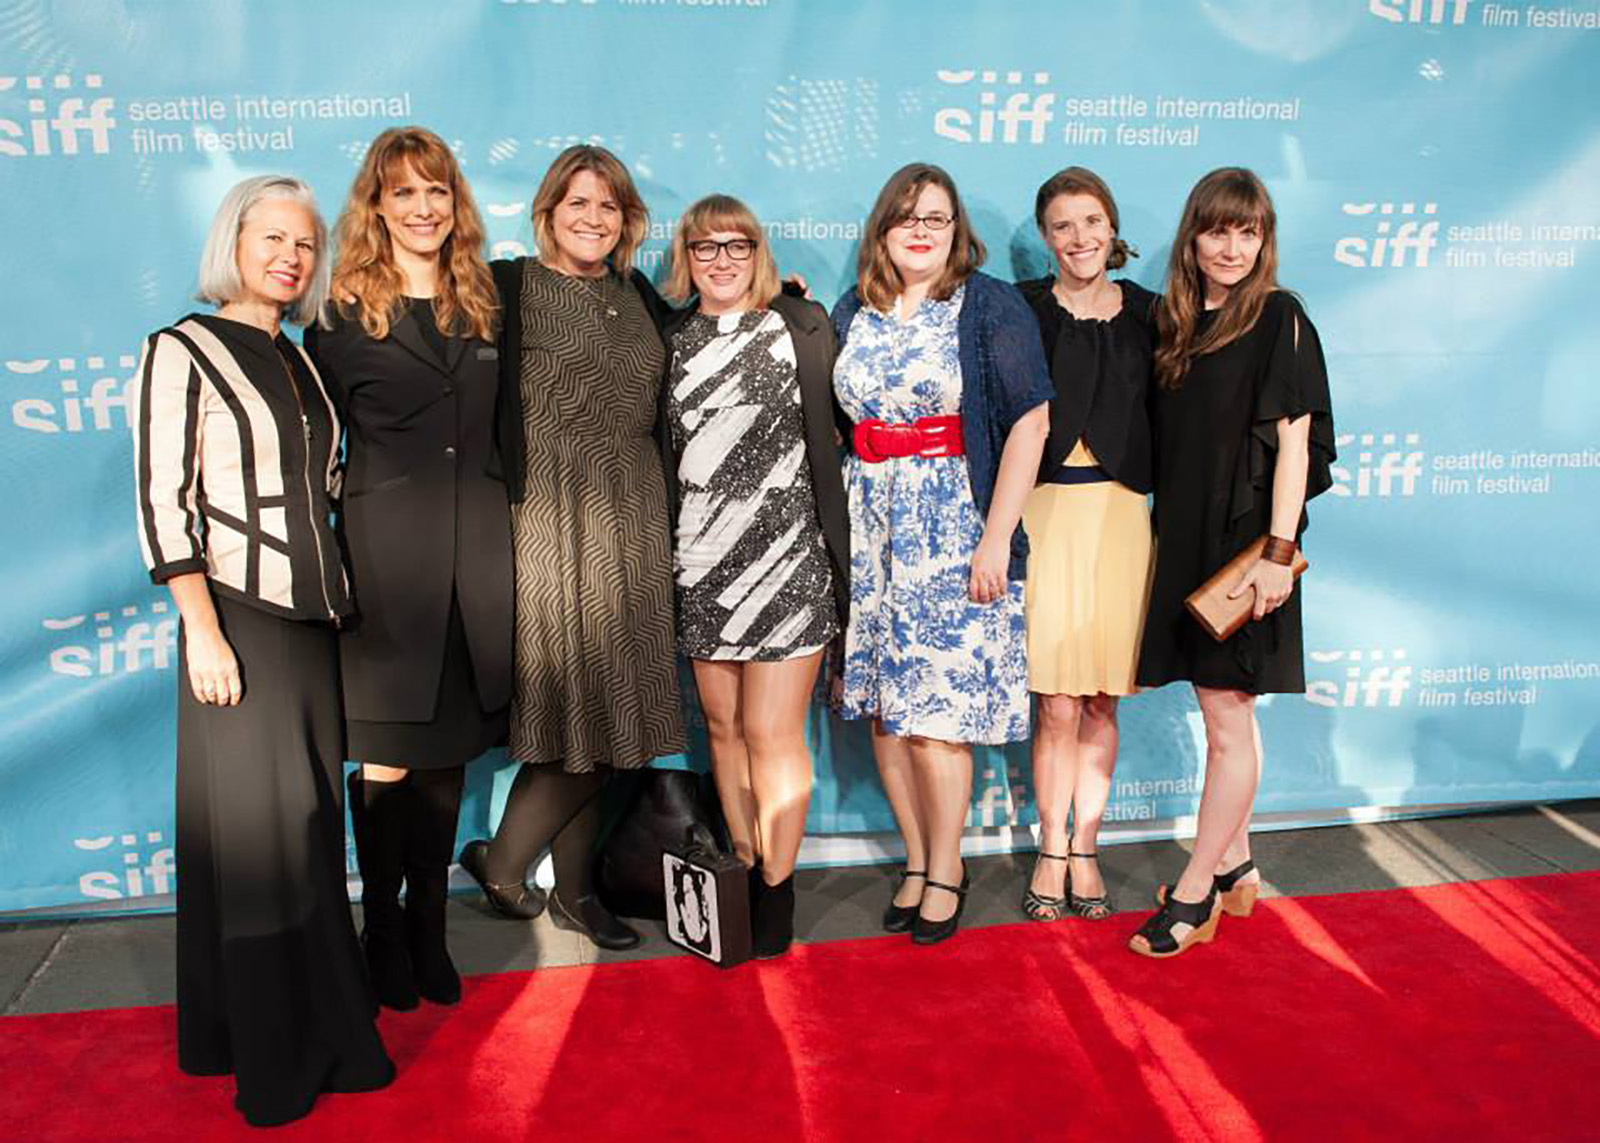 Opening Night attendees, including SIFF favorite, director, Lynn Shelton (second from left), celebrate the 41st Seattle International Film Festival from the red carpet at McCaw Hall